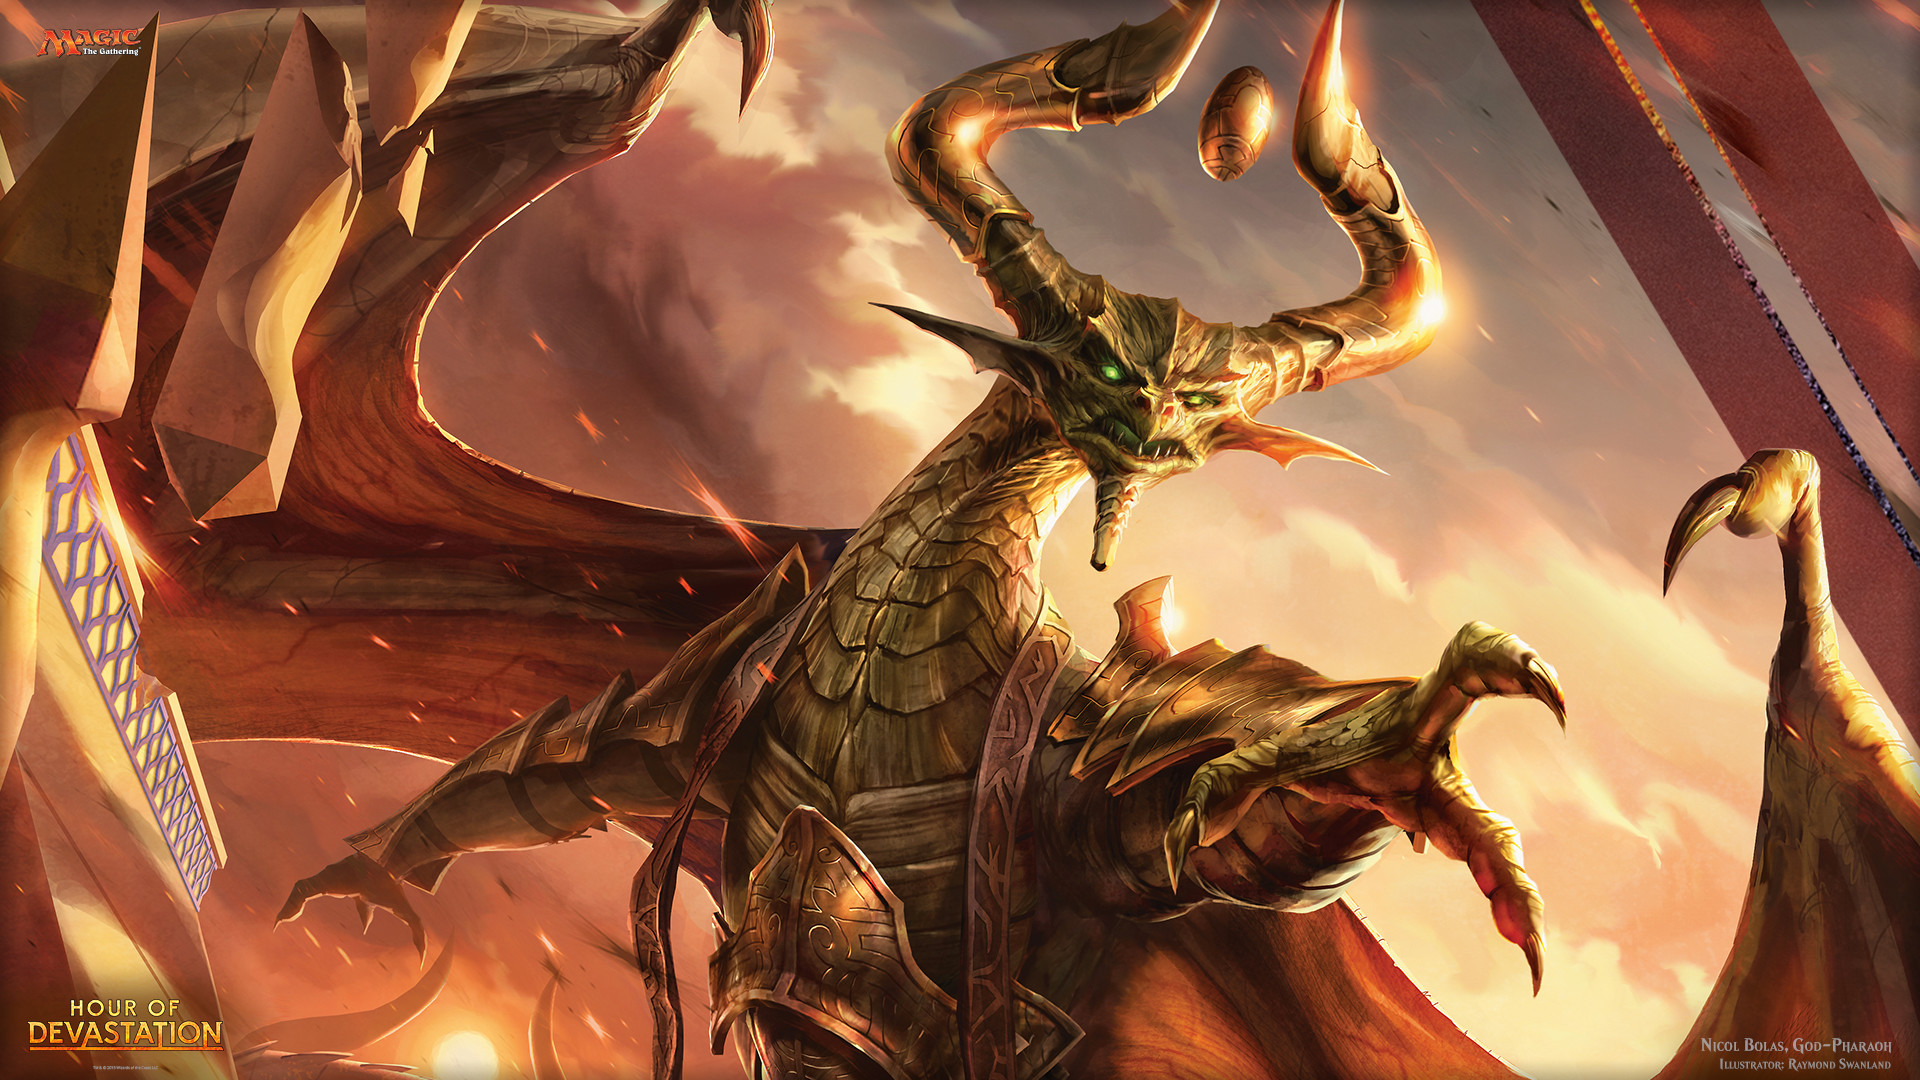 1920x1080 magic the gathering HD Wallpapers - Free Desktop Images and Photos